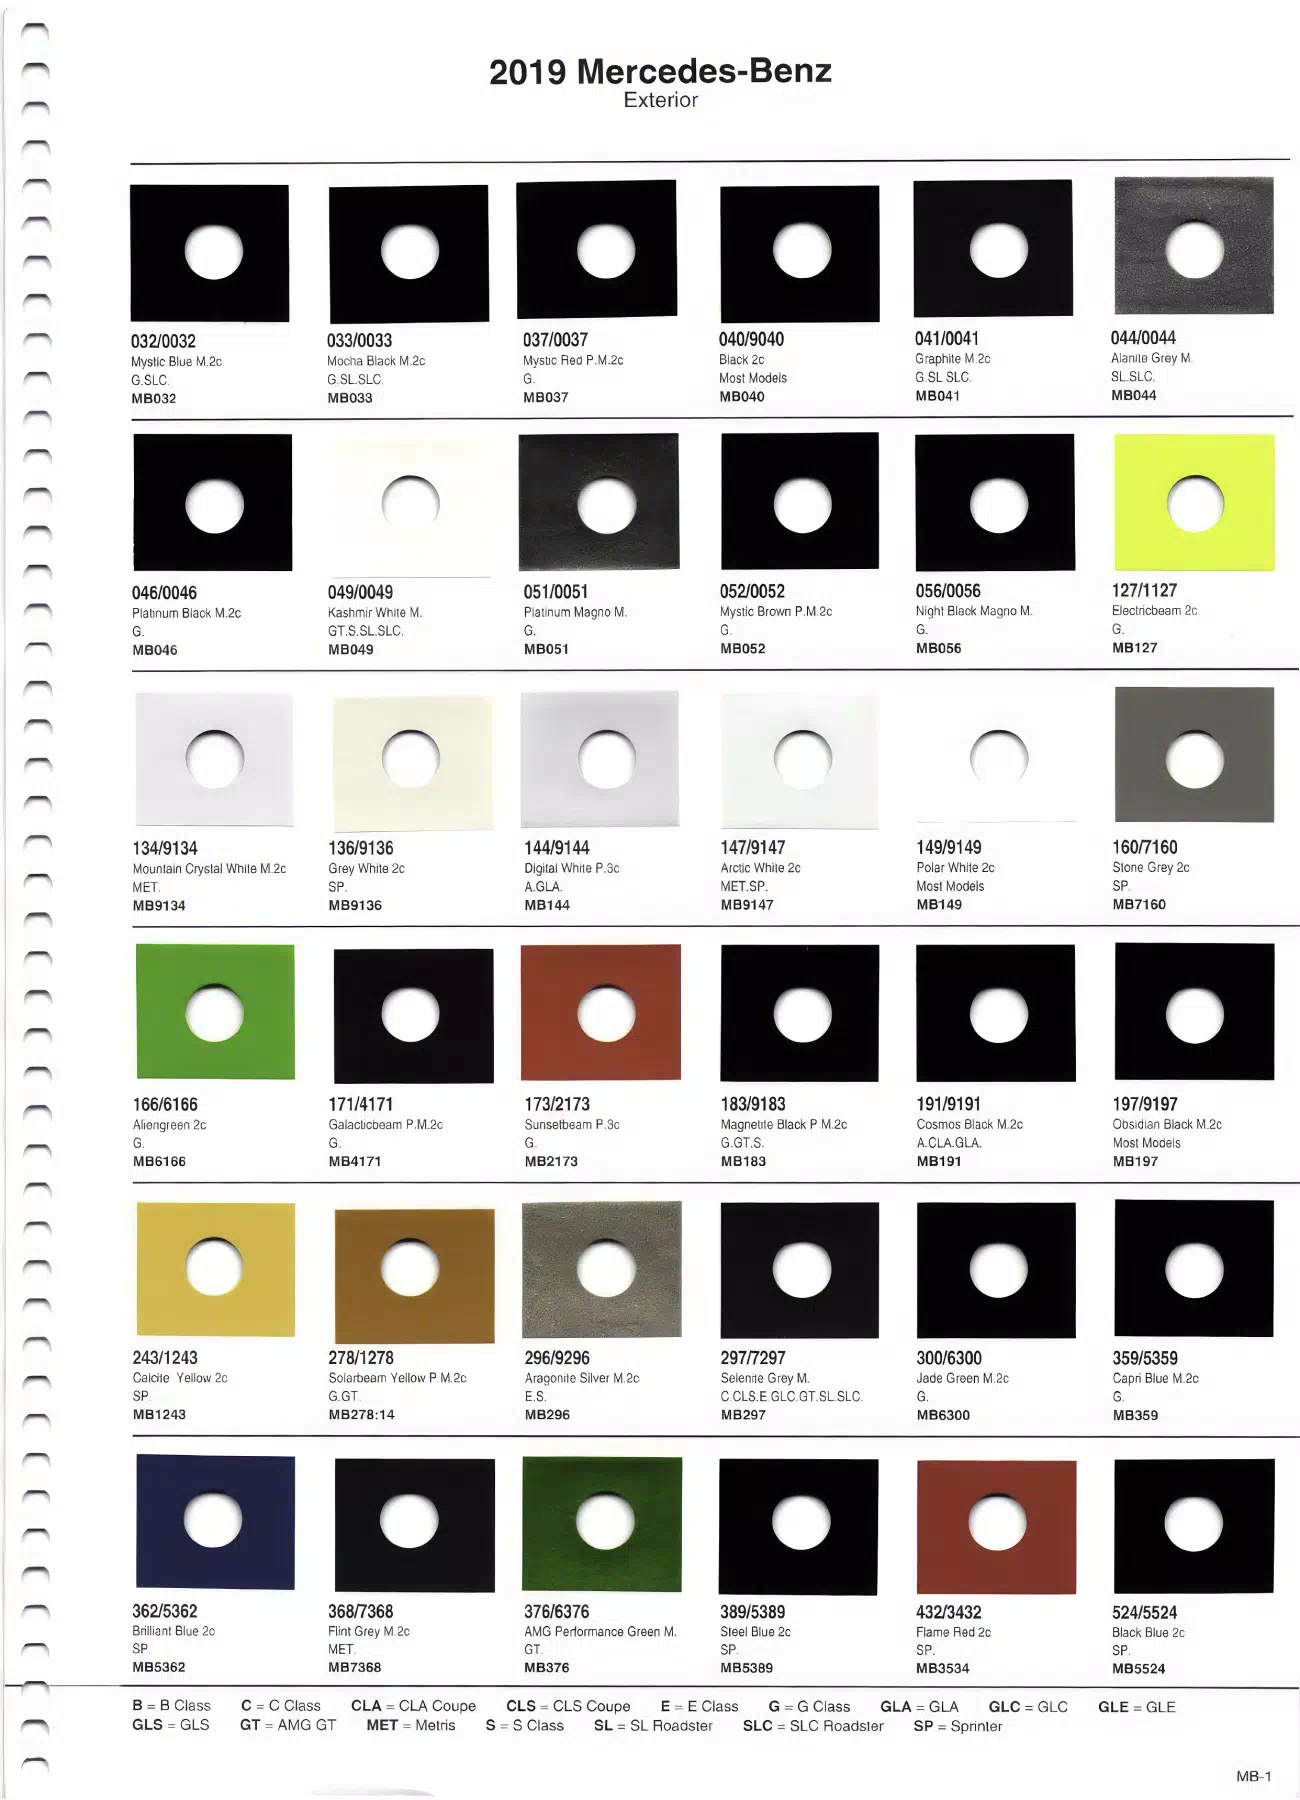 Oem Color Swatches with Paint codes, Color Names, Color Shades, and Akzo stock numbers.  This is a "Paint Chart"